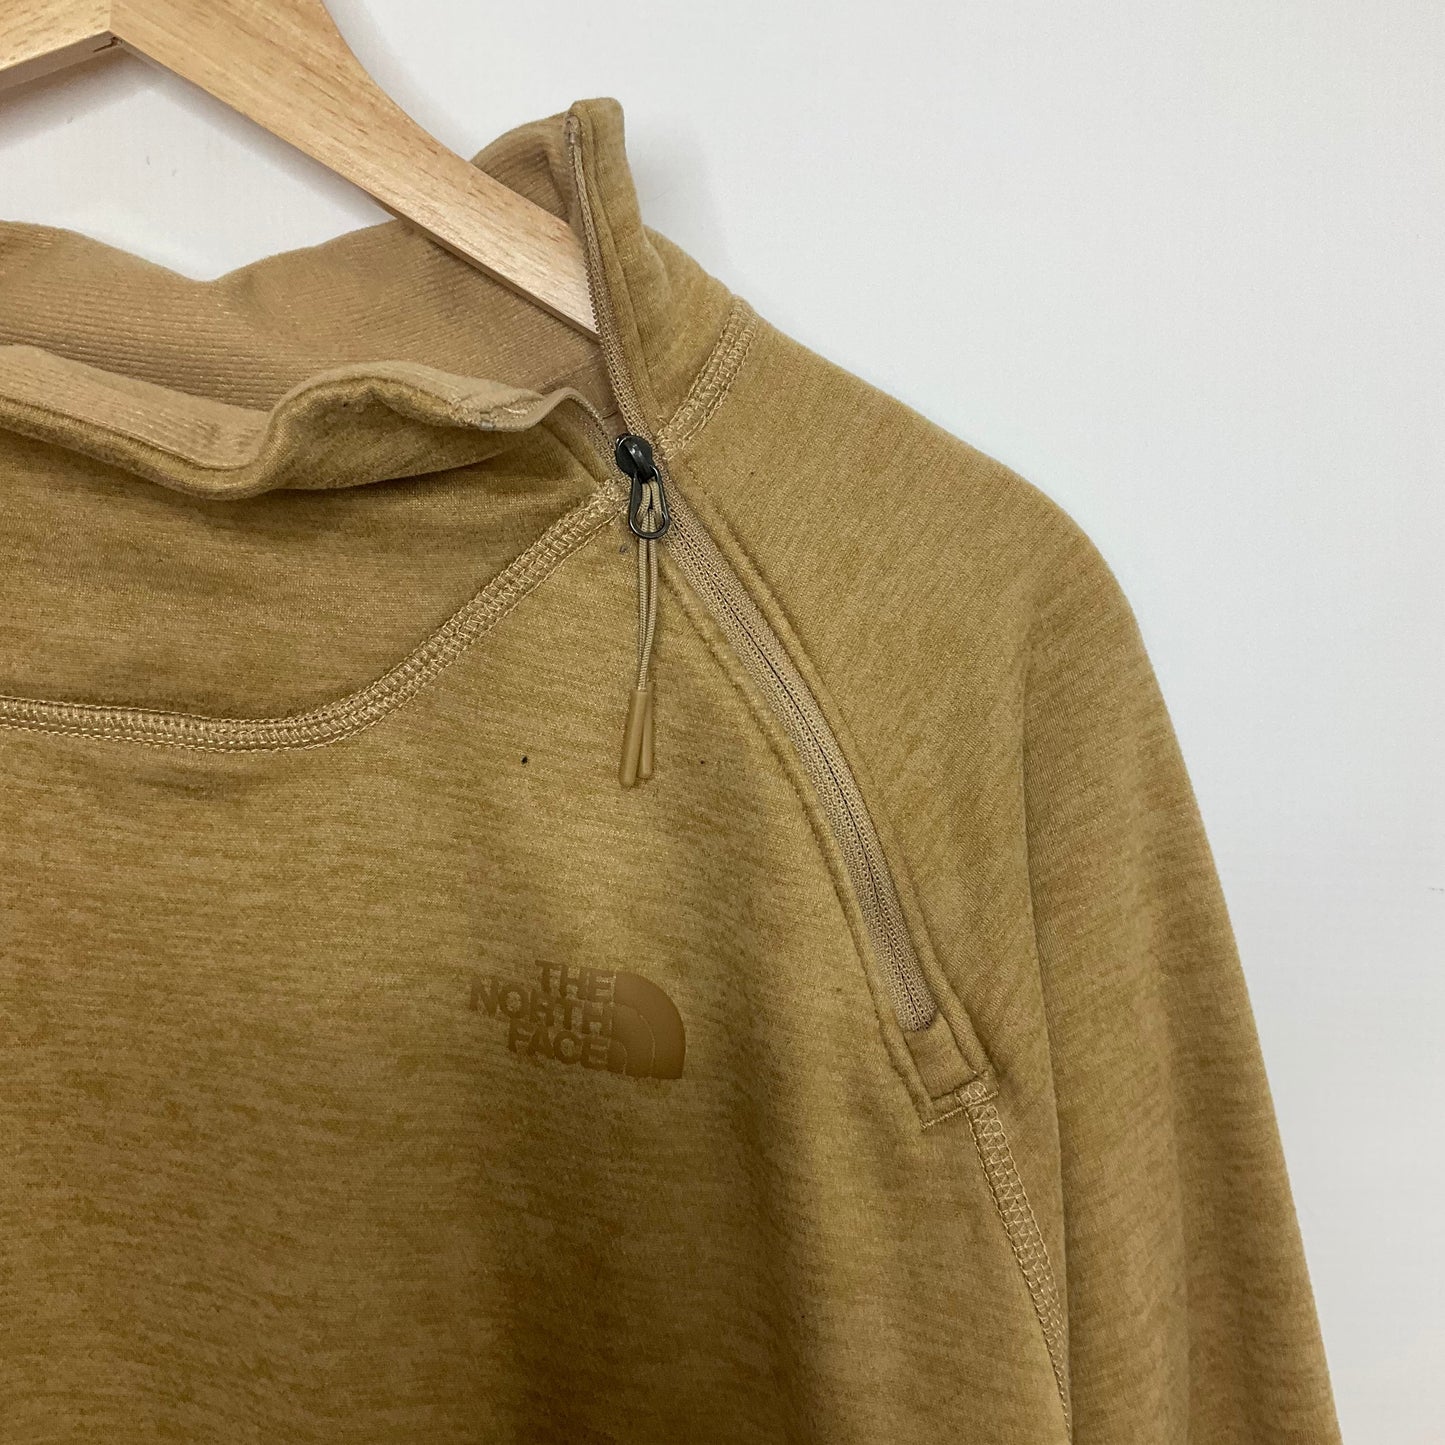 Brown Sweatshirt Collar The North Face, Size 2x